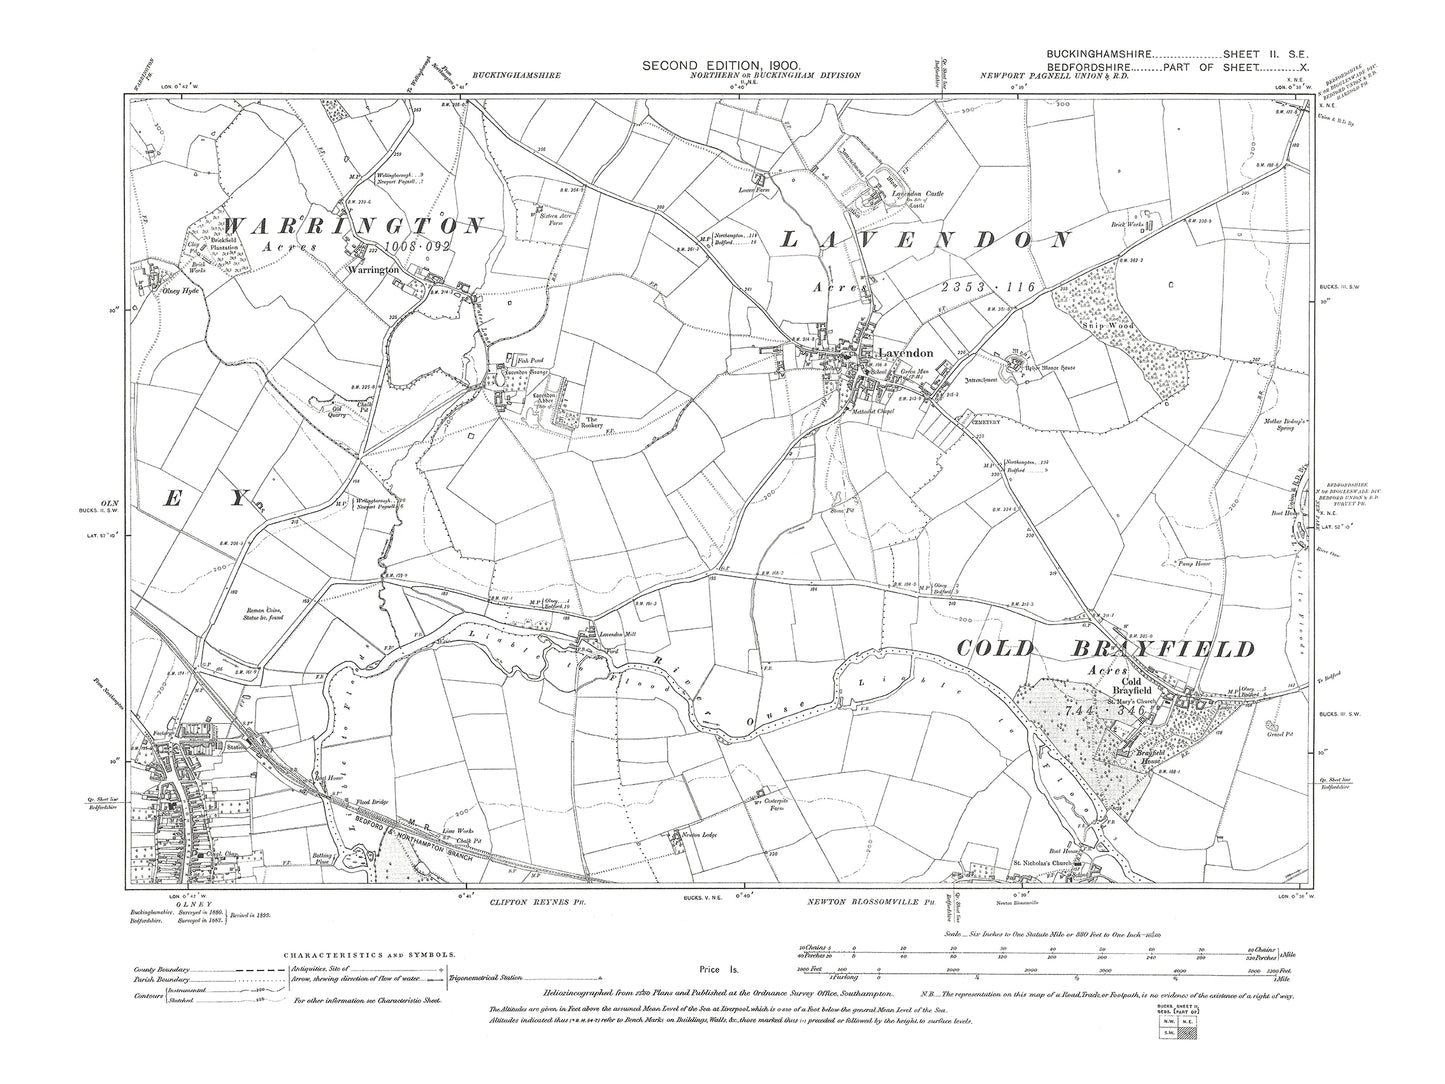 Old OS map dated 1900, showing Lavendon, Cold Brayfield, Olney (north), Warrington in Buckinghamshire - 2SE